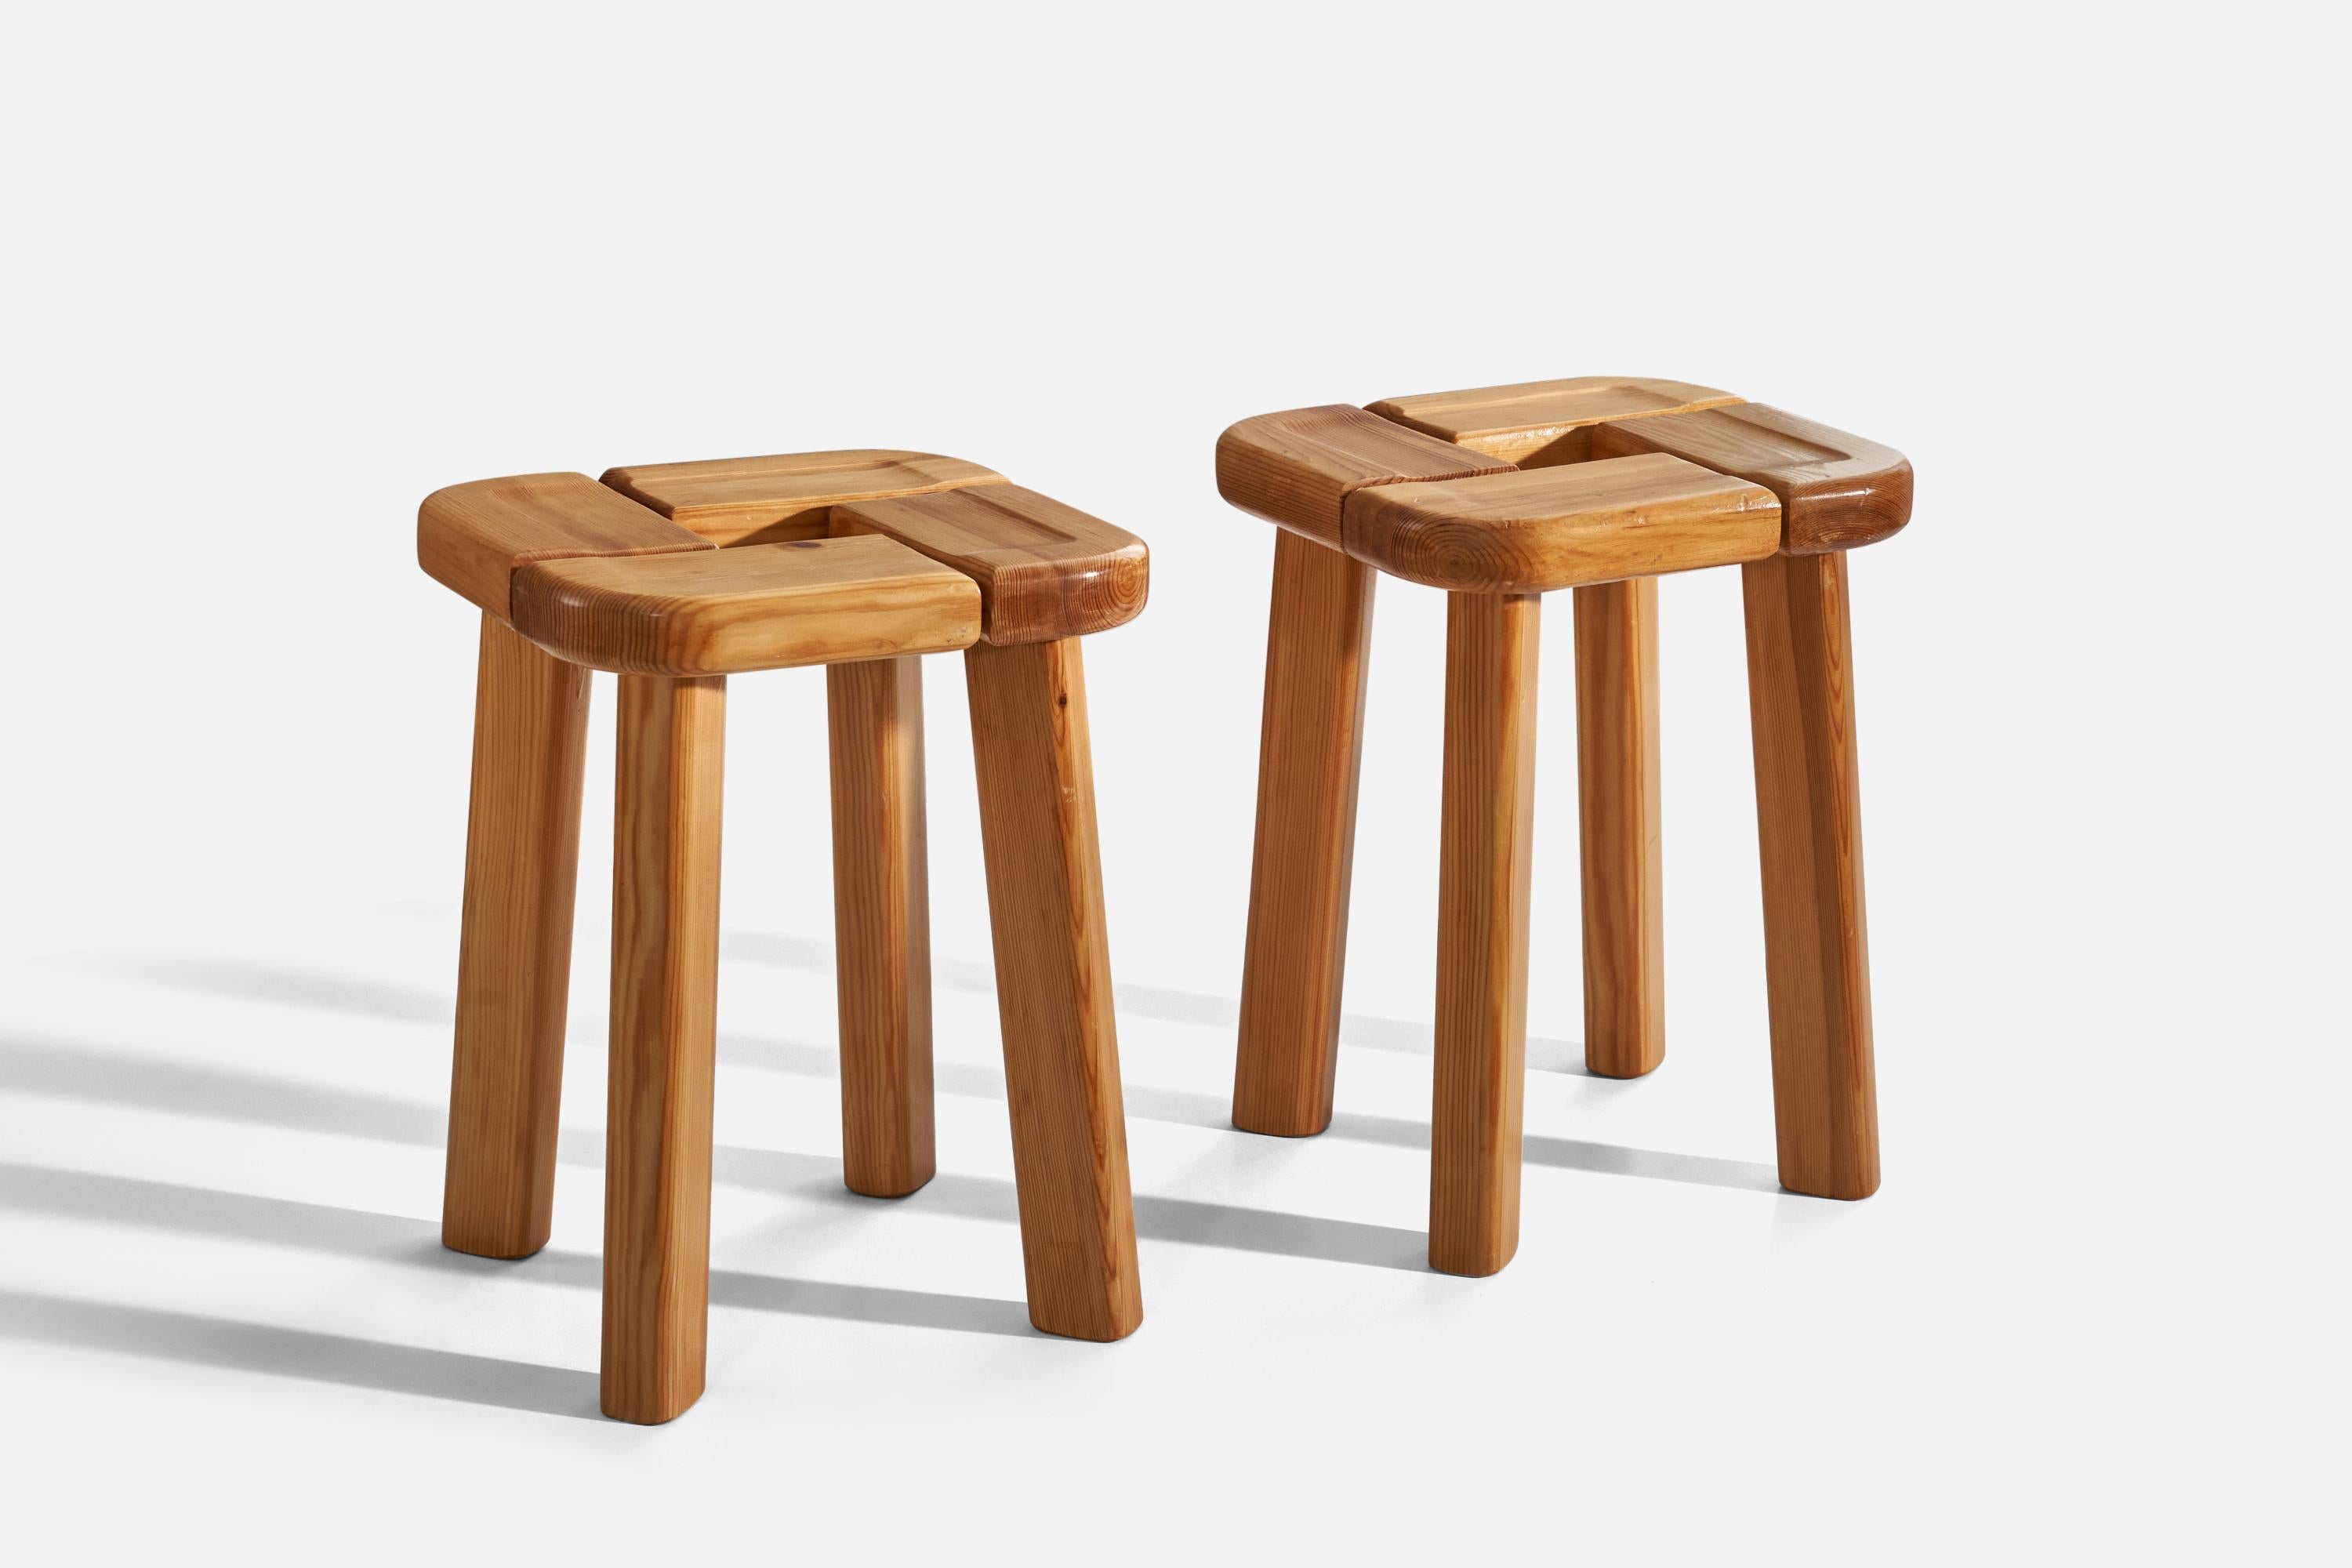 A pair of solid pine stools designed and production attributed to Olof Ottelin, Finland, 1960s.

